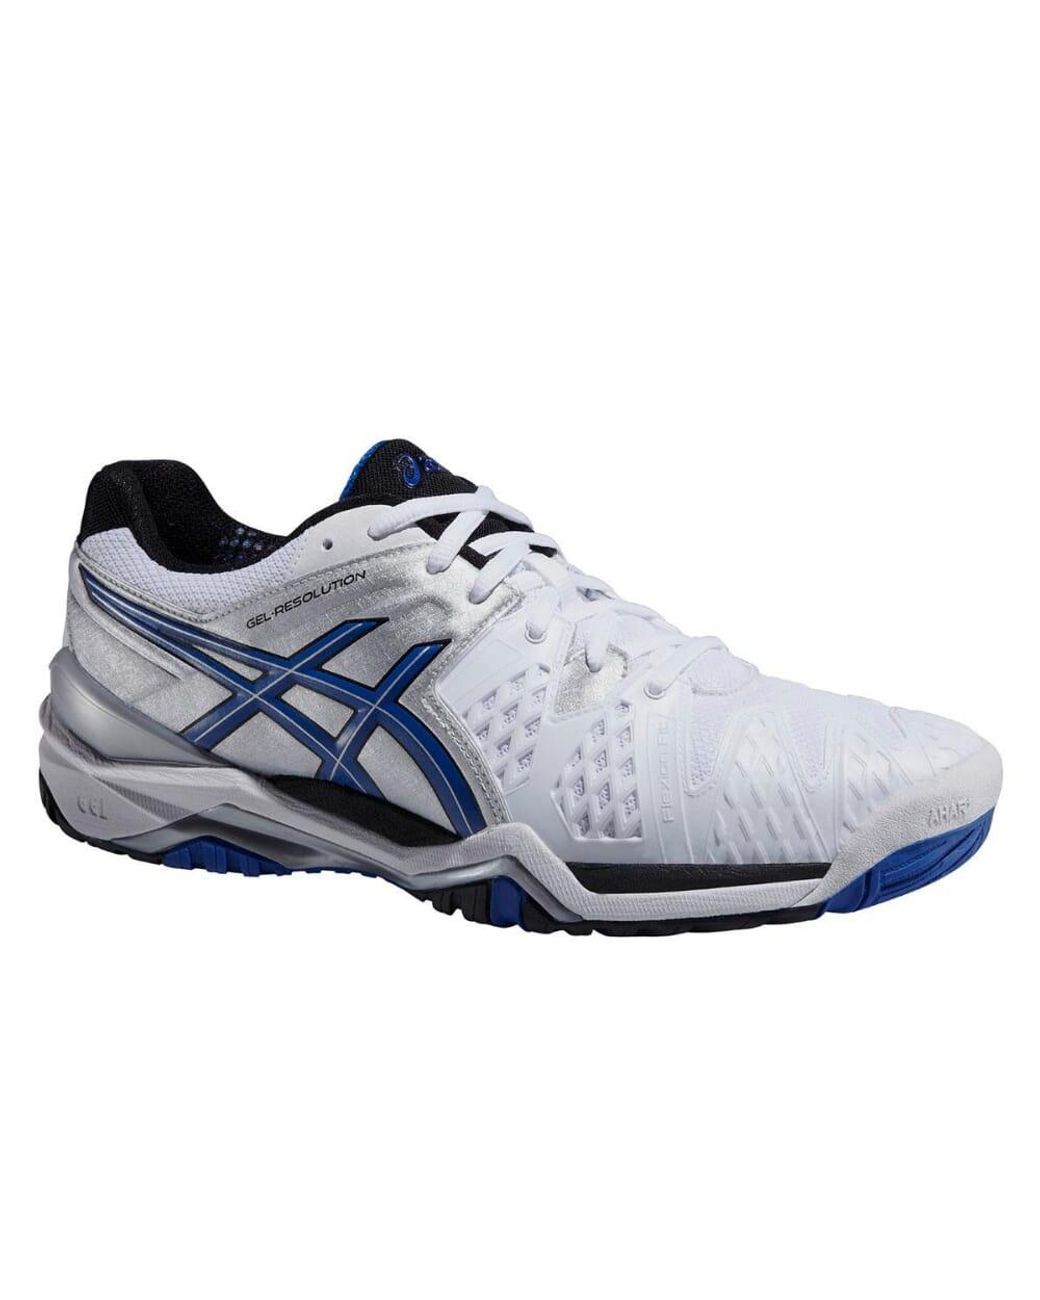 Asics Gel-resolution 6 Clay White/blue/silver E503y-0142 for Men | Lyst